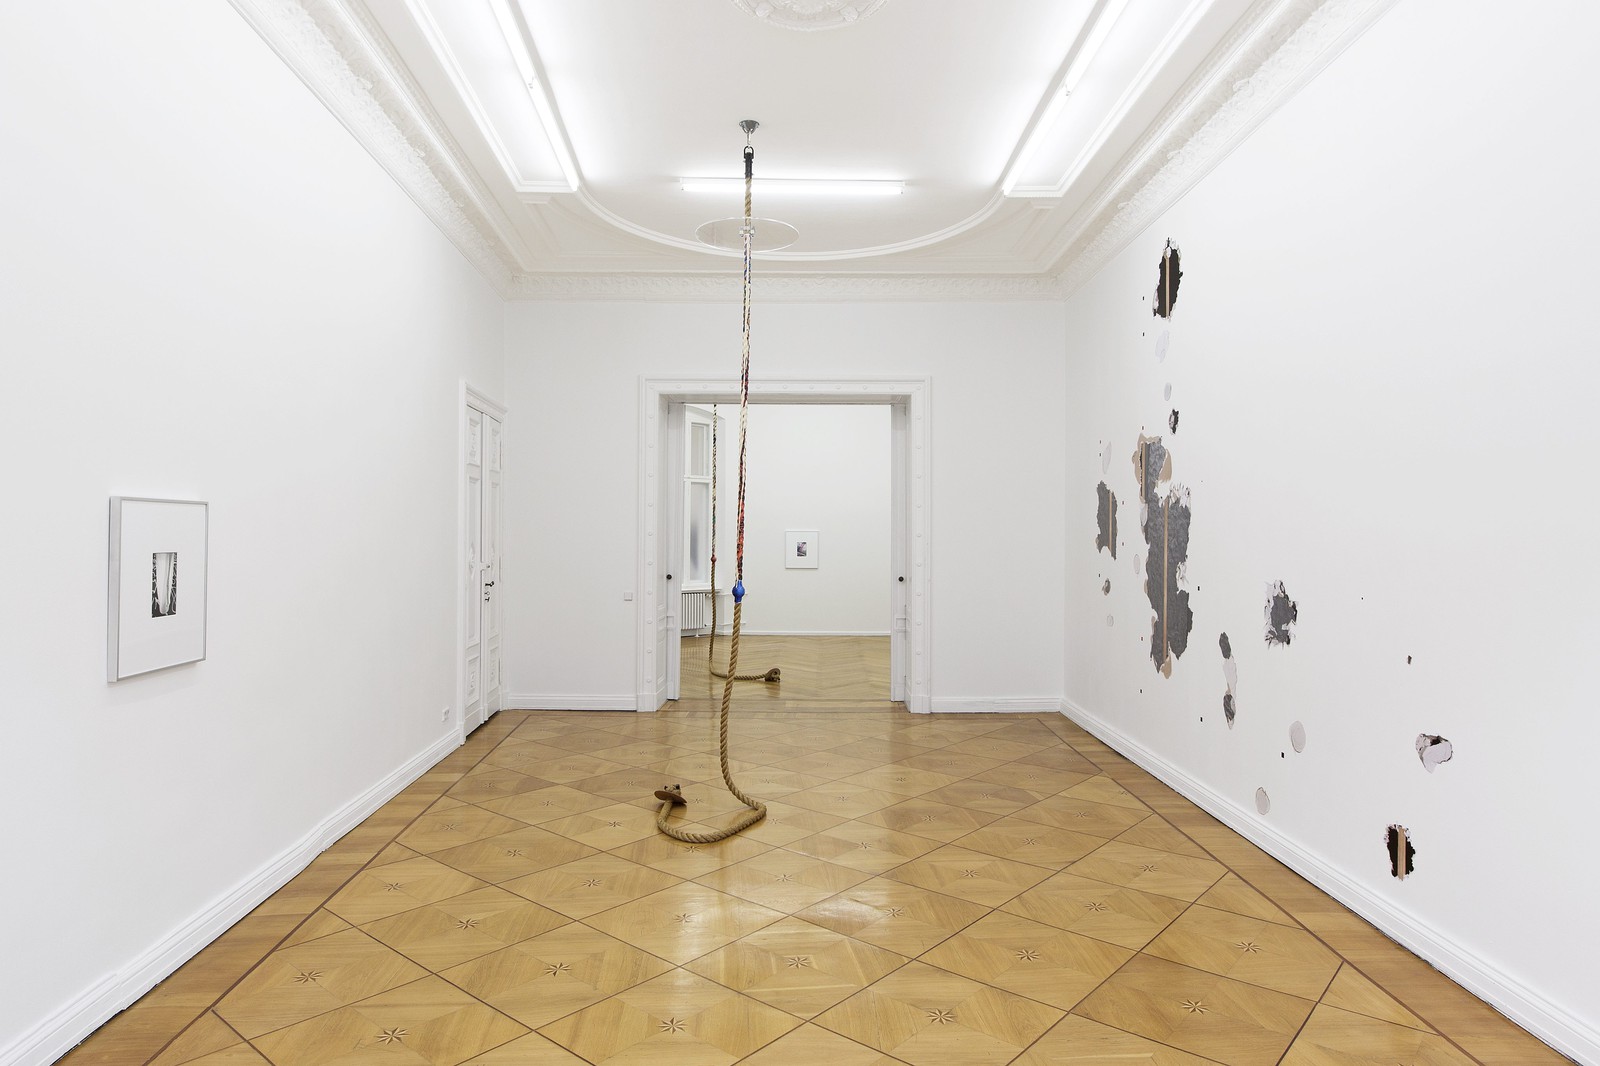 Installation view, A Simulated Future amid Collapse, Société, Berlin, 2015